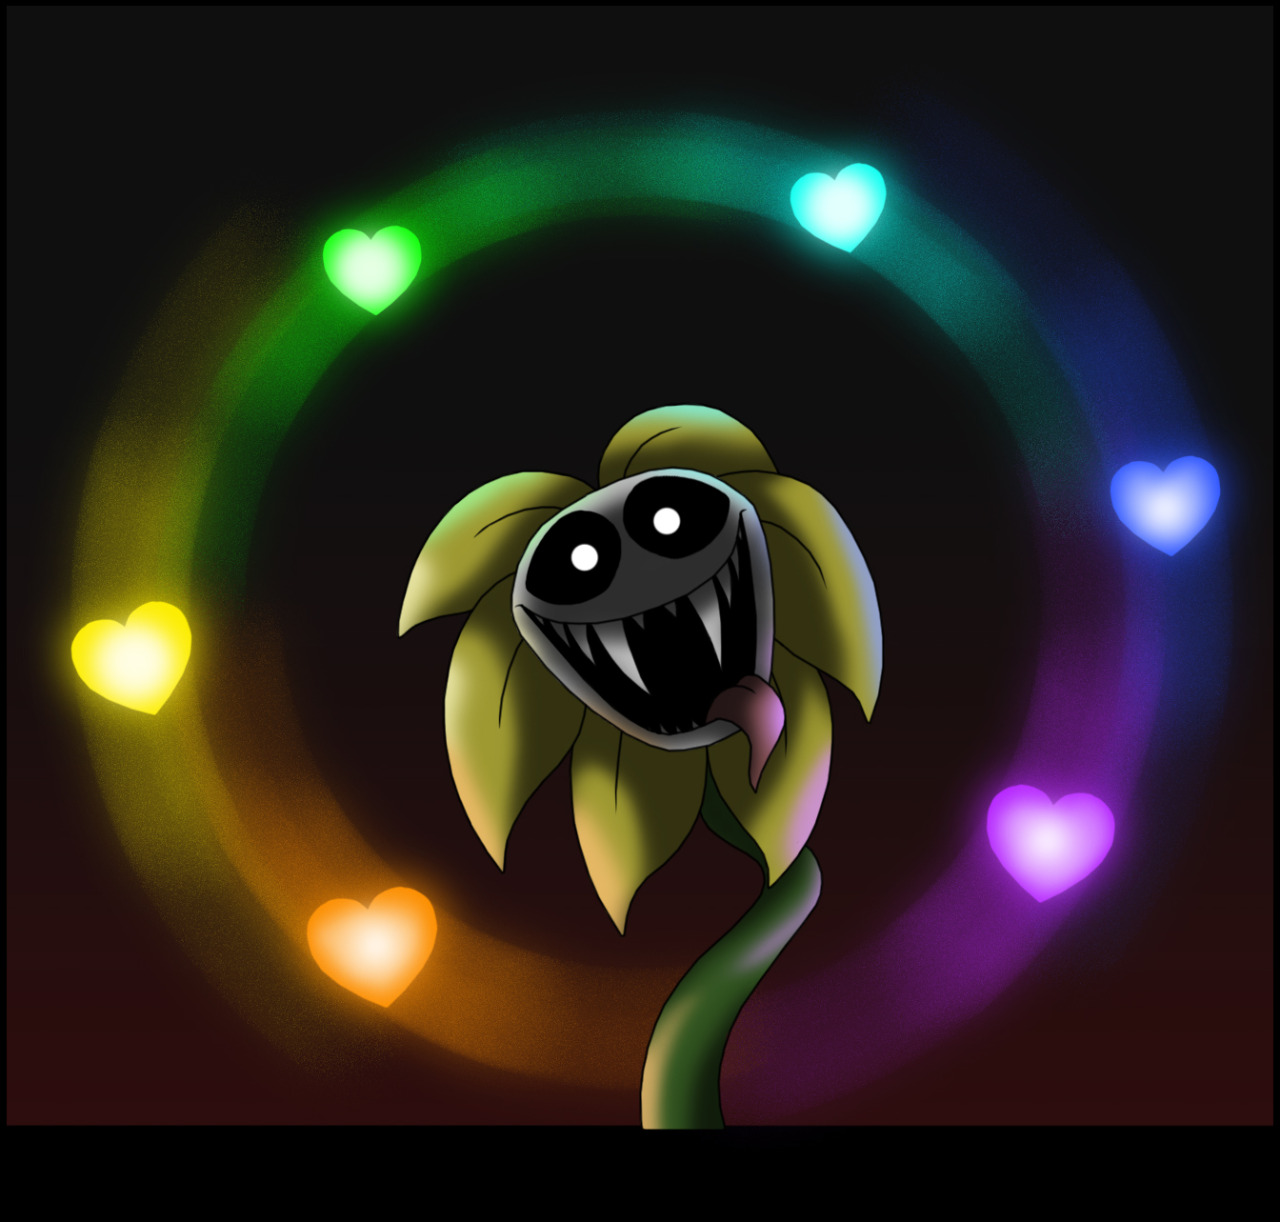 I never thought I'd draw Omega Flowey, since I consider the whole